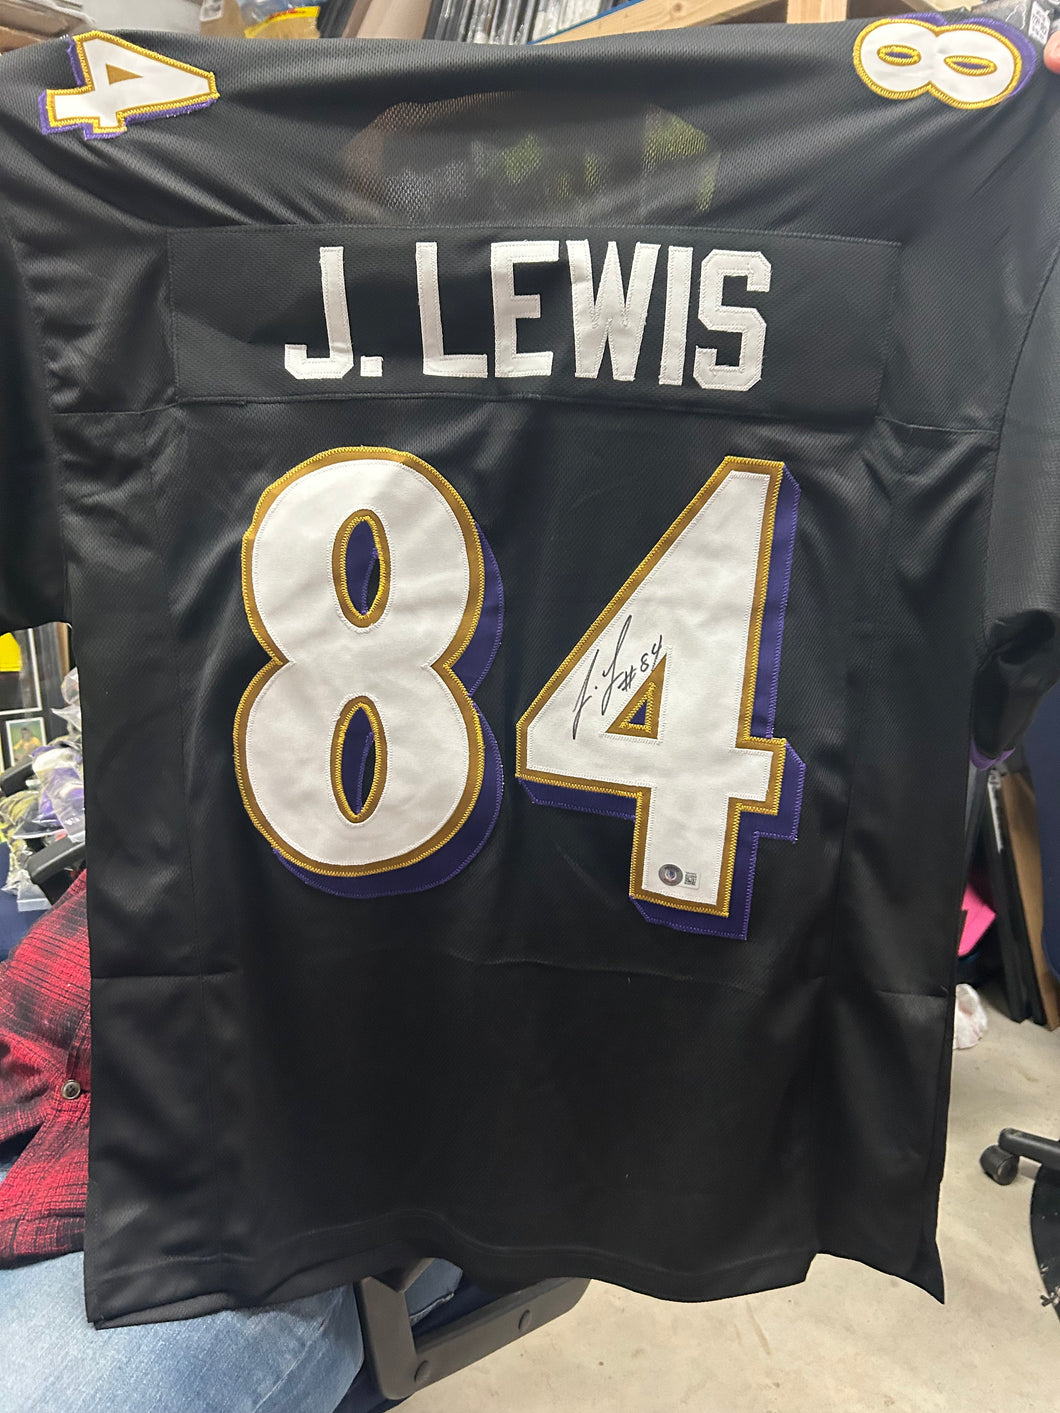 Jermaine Lewis signed jersey